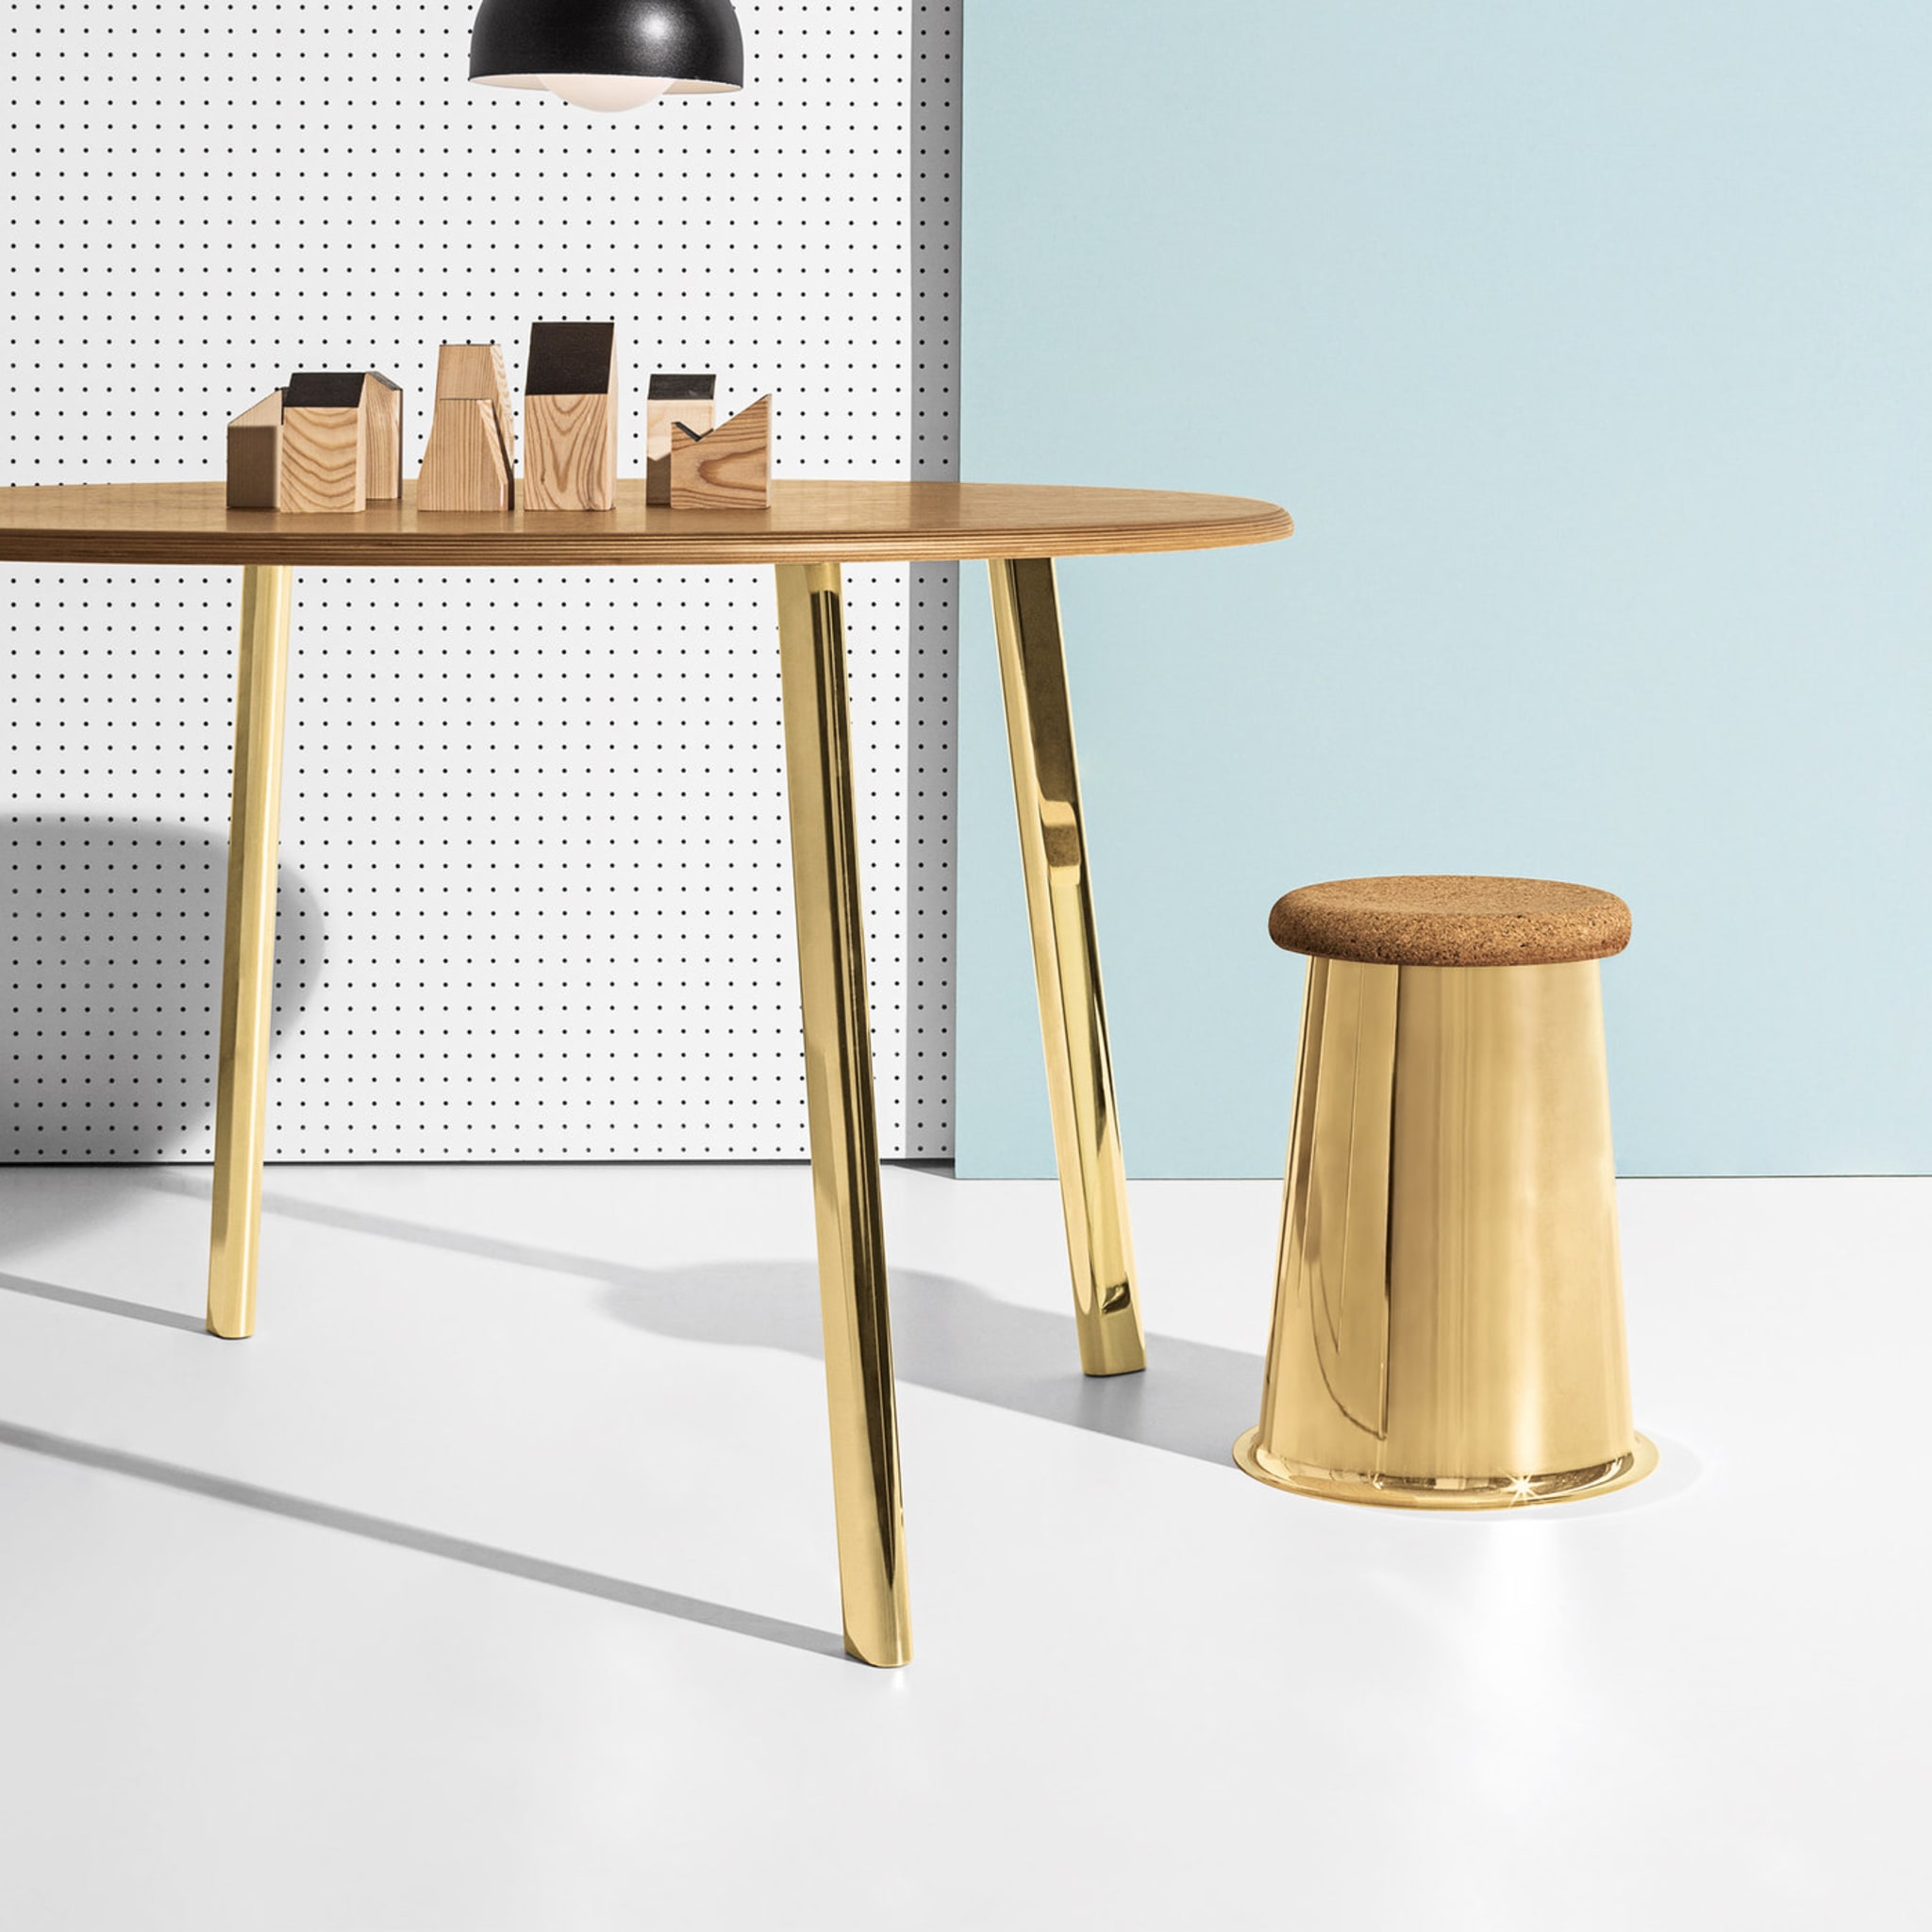 Siit Gold Stool - Alternative view 3